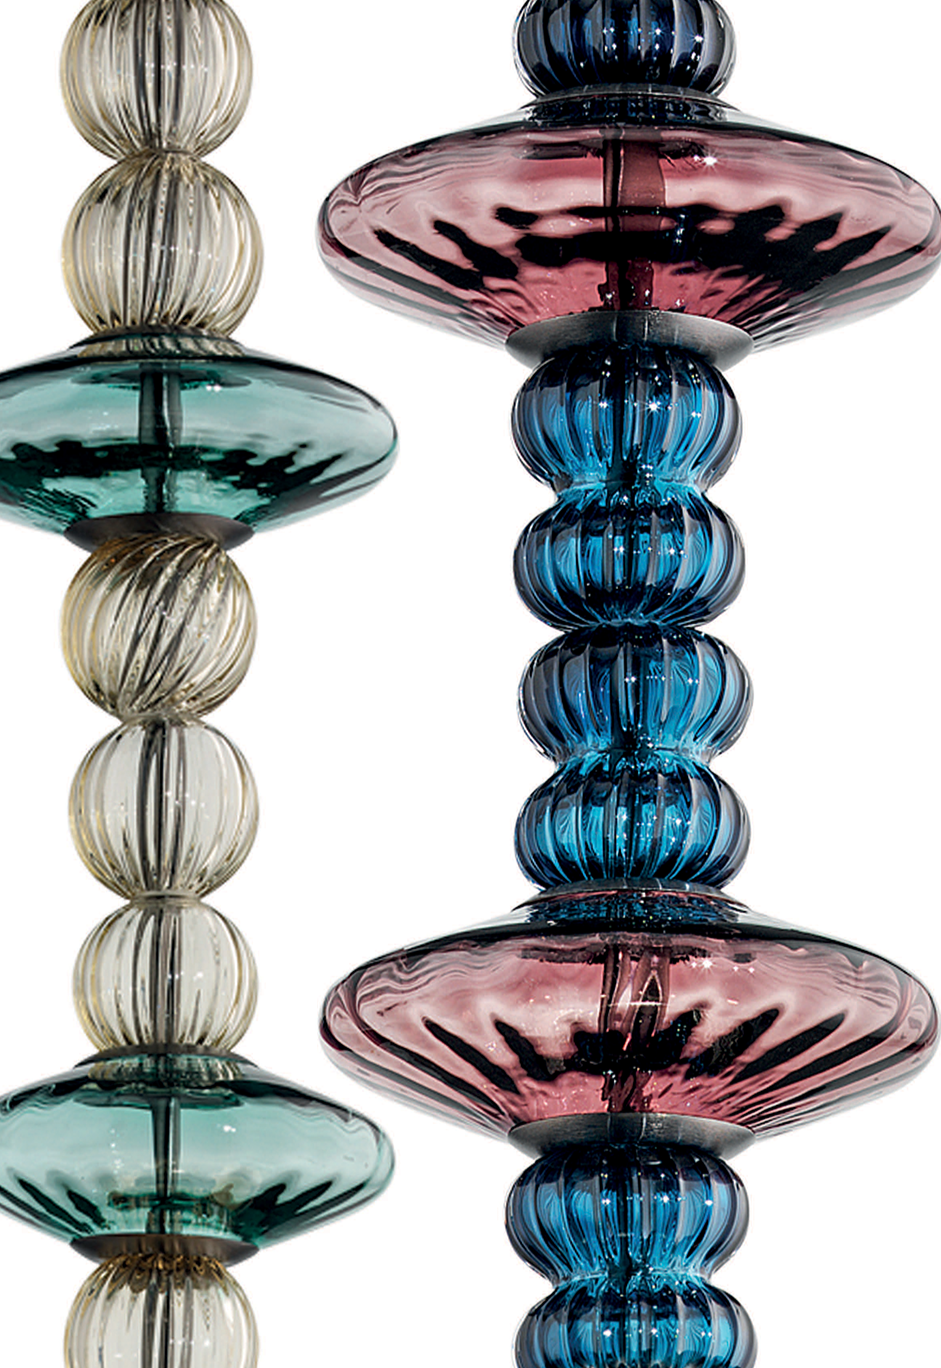 Handcrafted Artistic Single Pendant Ceiling Lamp with Murano Glass and Lampshade.